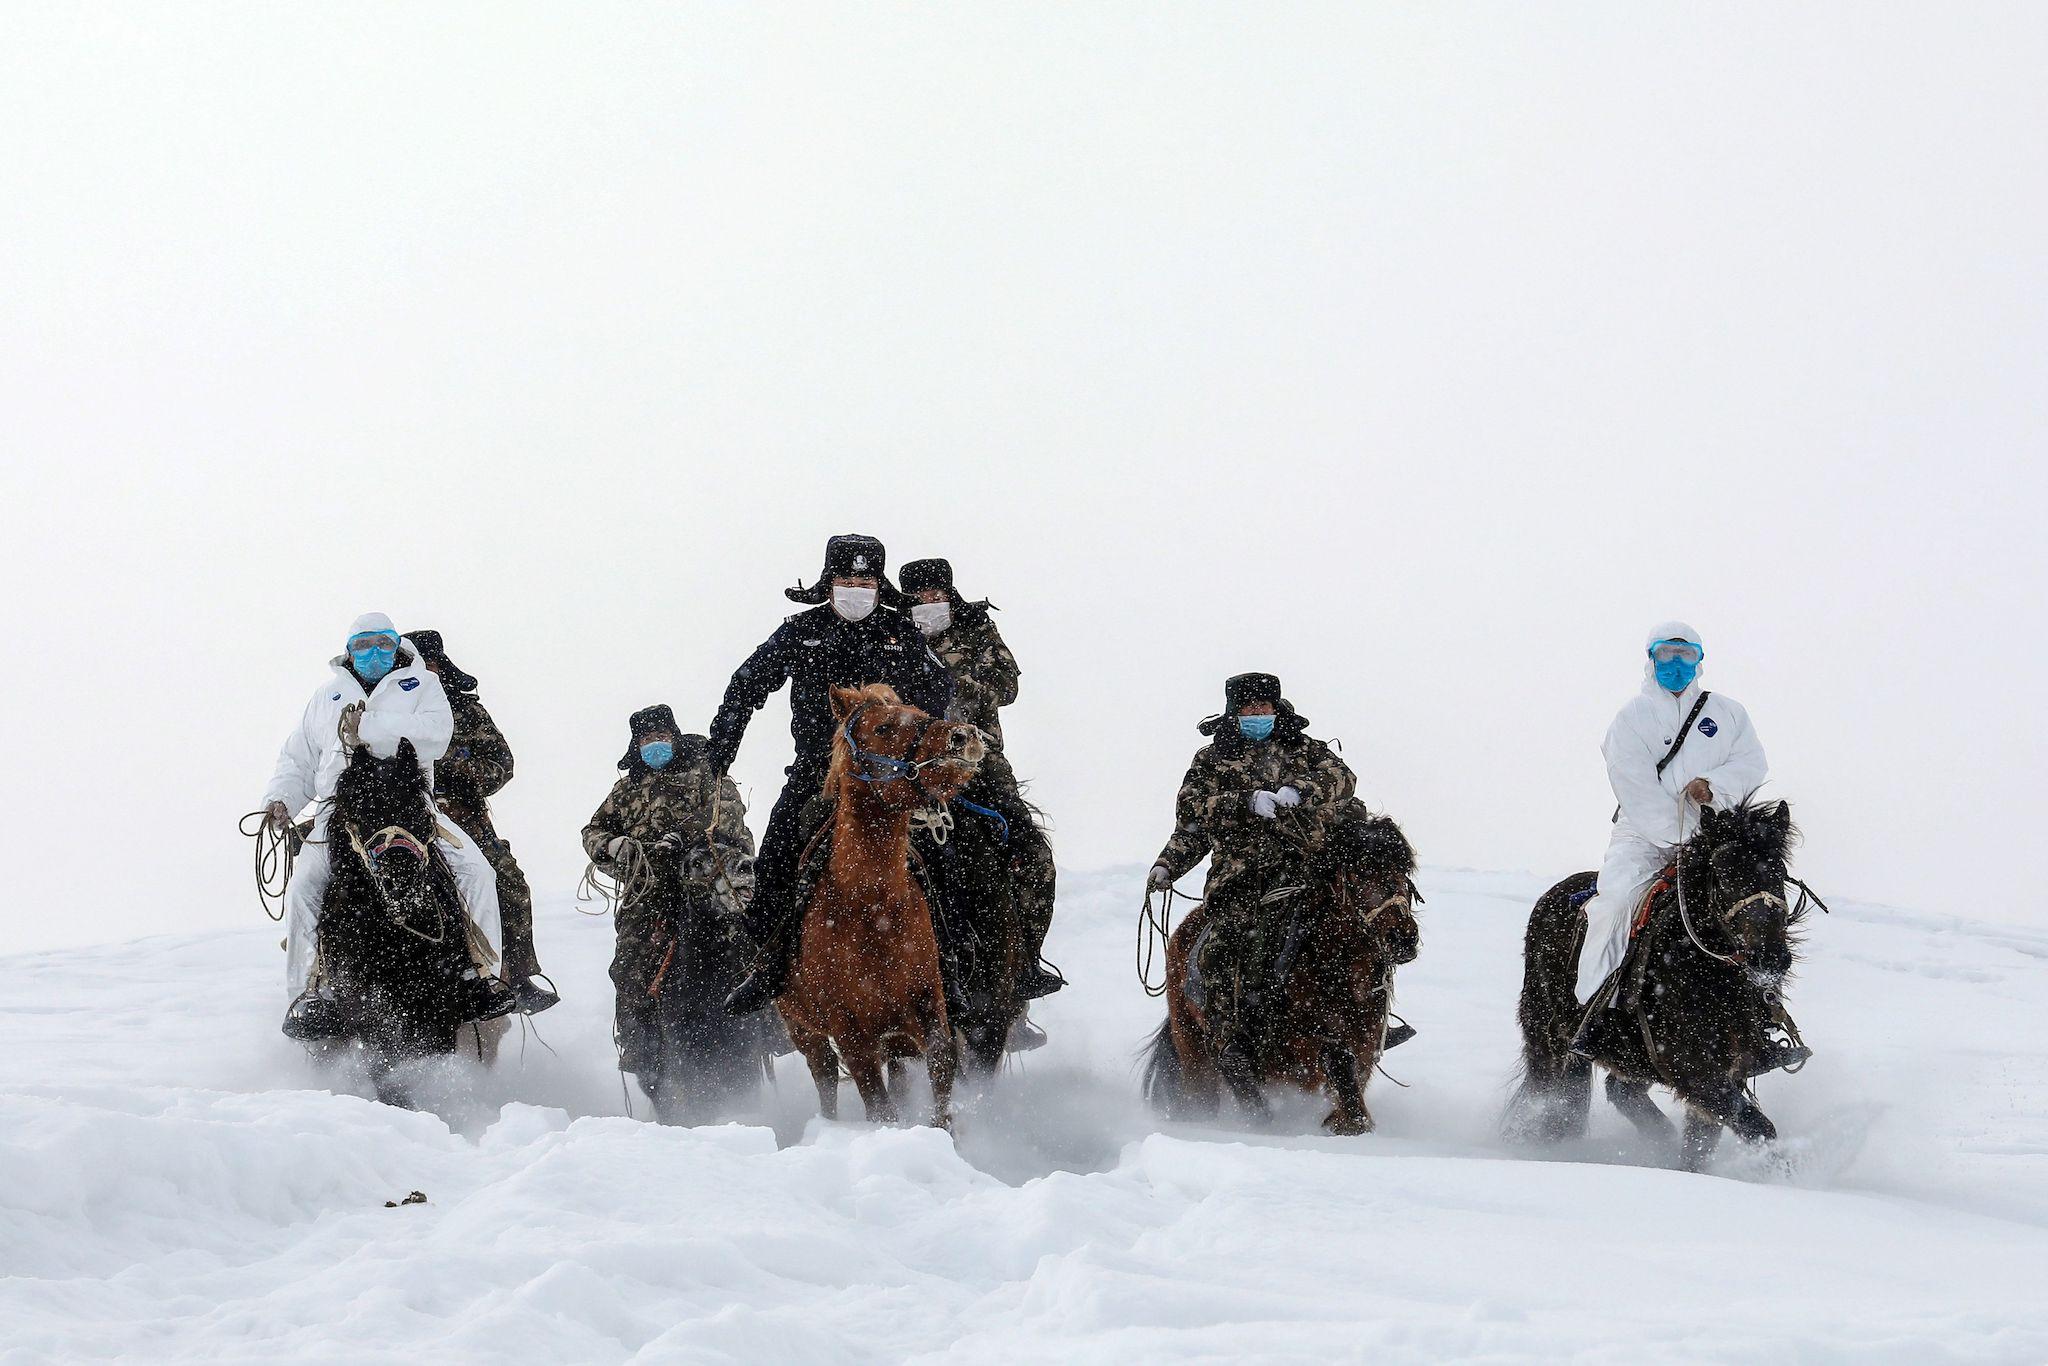 This photo taken on February 19, 2020 shows police officers wearing protective face masks riding horses on their way to visit residents who live in remote areas in Altay, farwest China's Xinjiang region, to promote the awareness of the virus